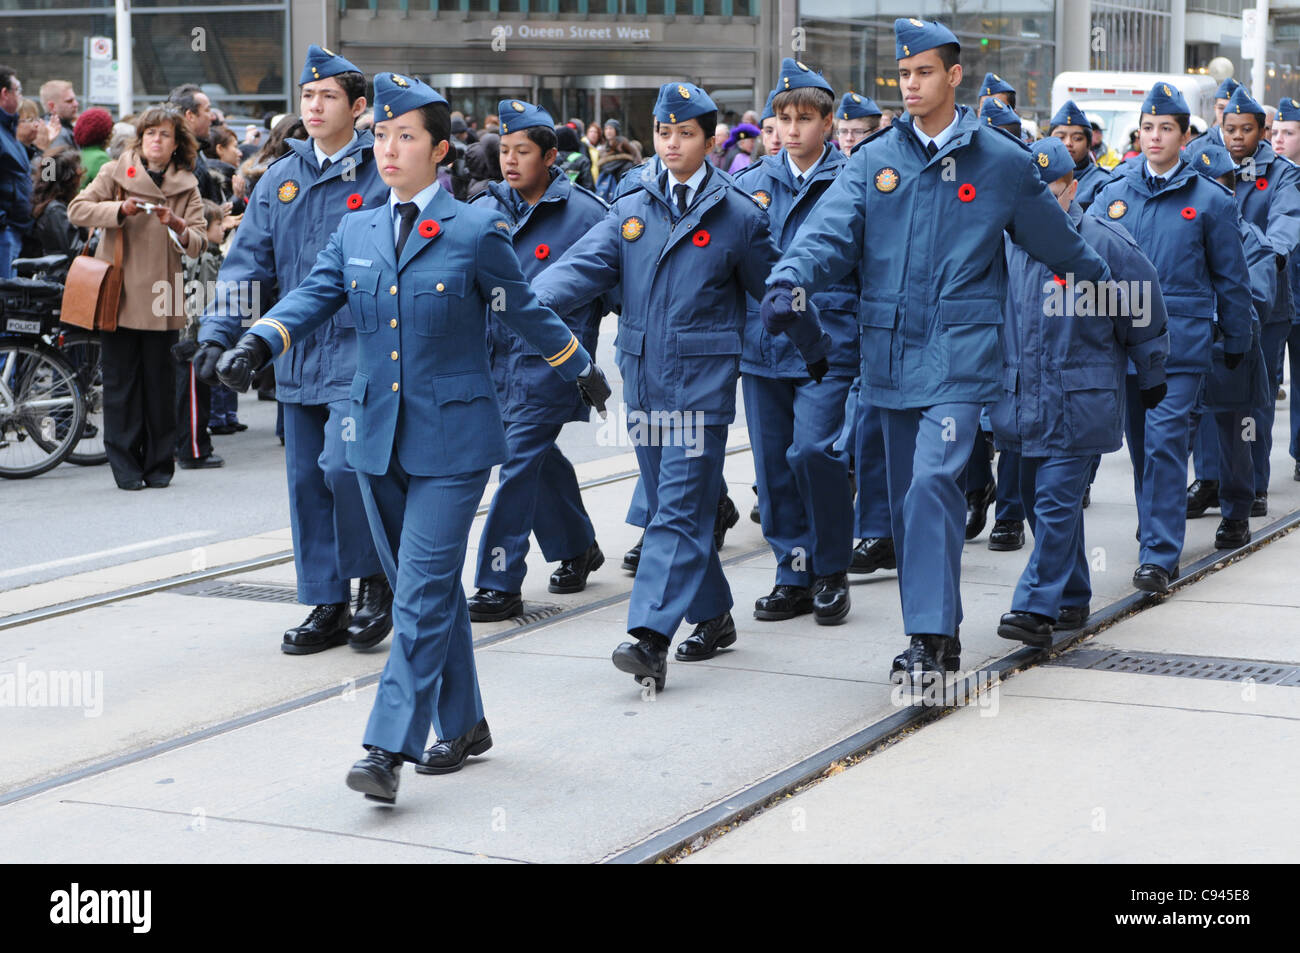 Royal Canadian Air Cadet Paiva leads squad mates marching along Queen Street West in front of Old City Hall during the Remembrance Day ceremony in Toronto, Ontario, Canada, November 11, 2011. Stock Photo